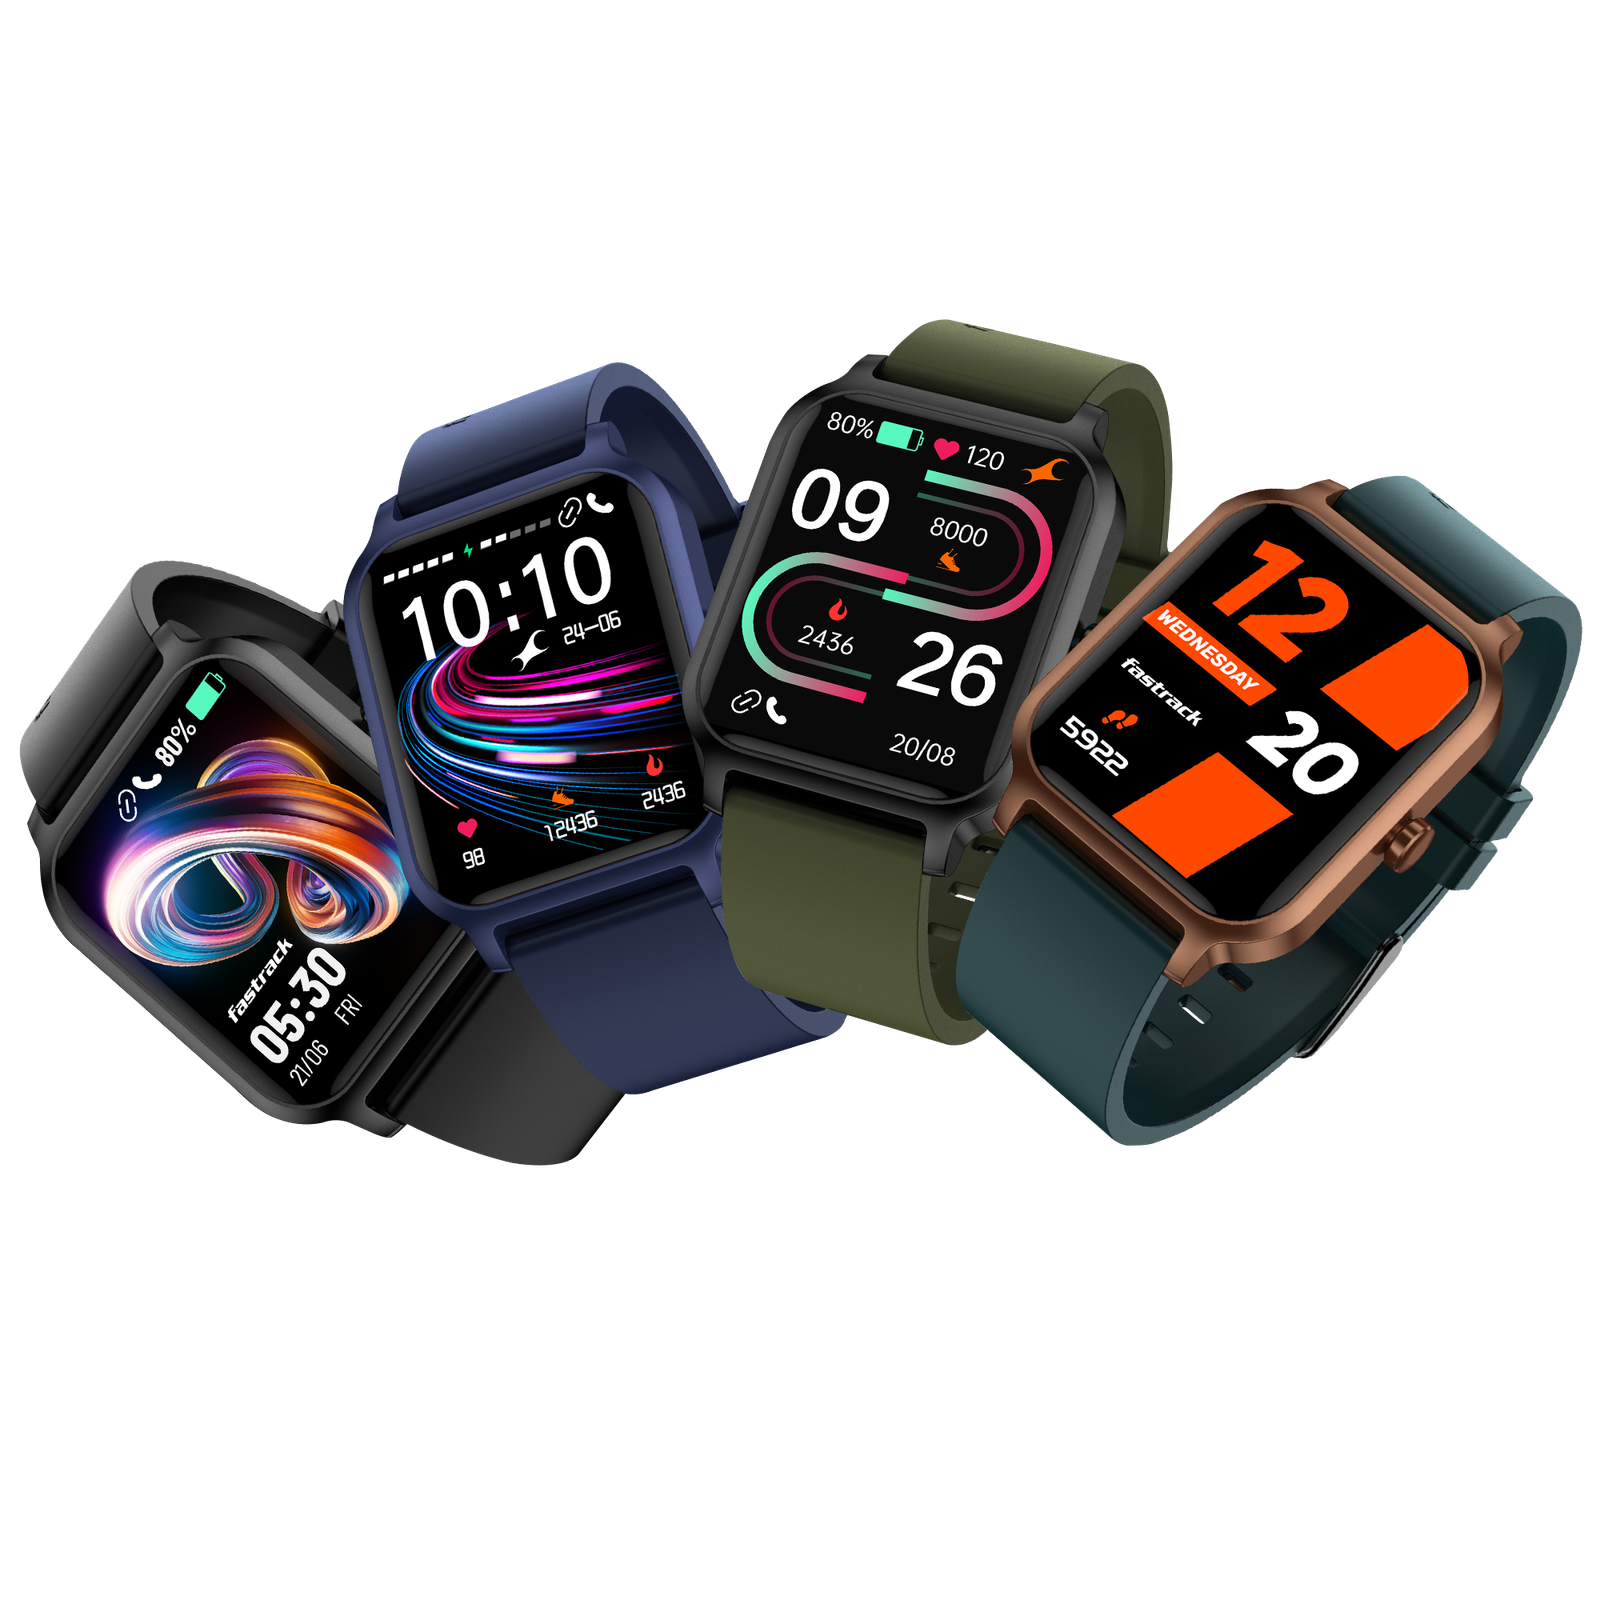 Revoltt FS1 the advanced BT calling smartwatch from Fastrack